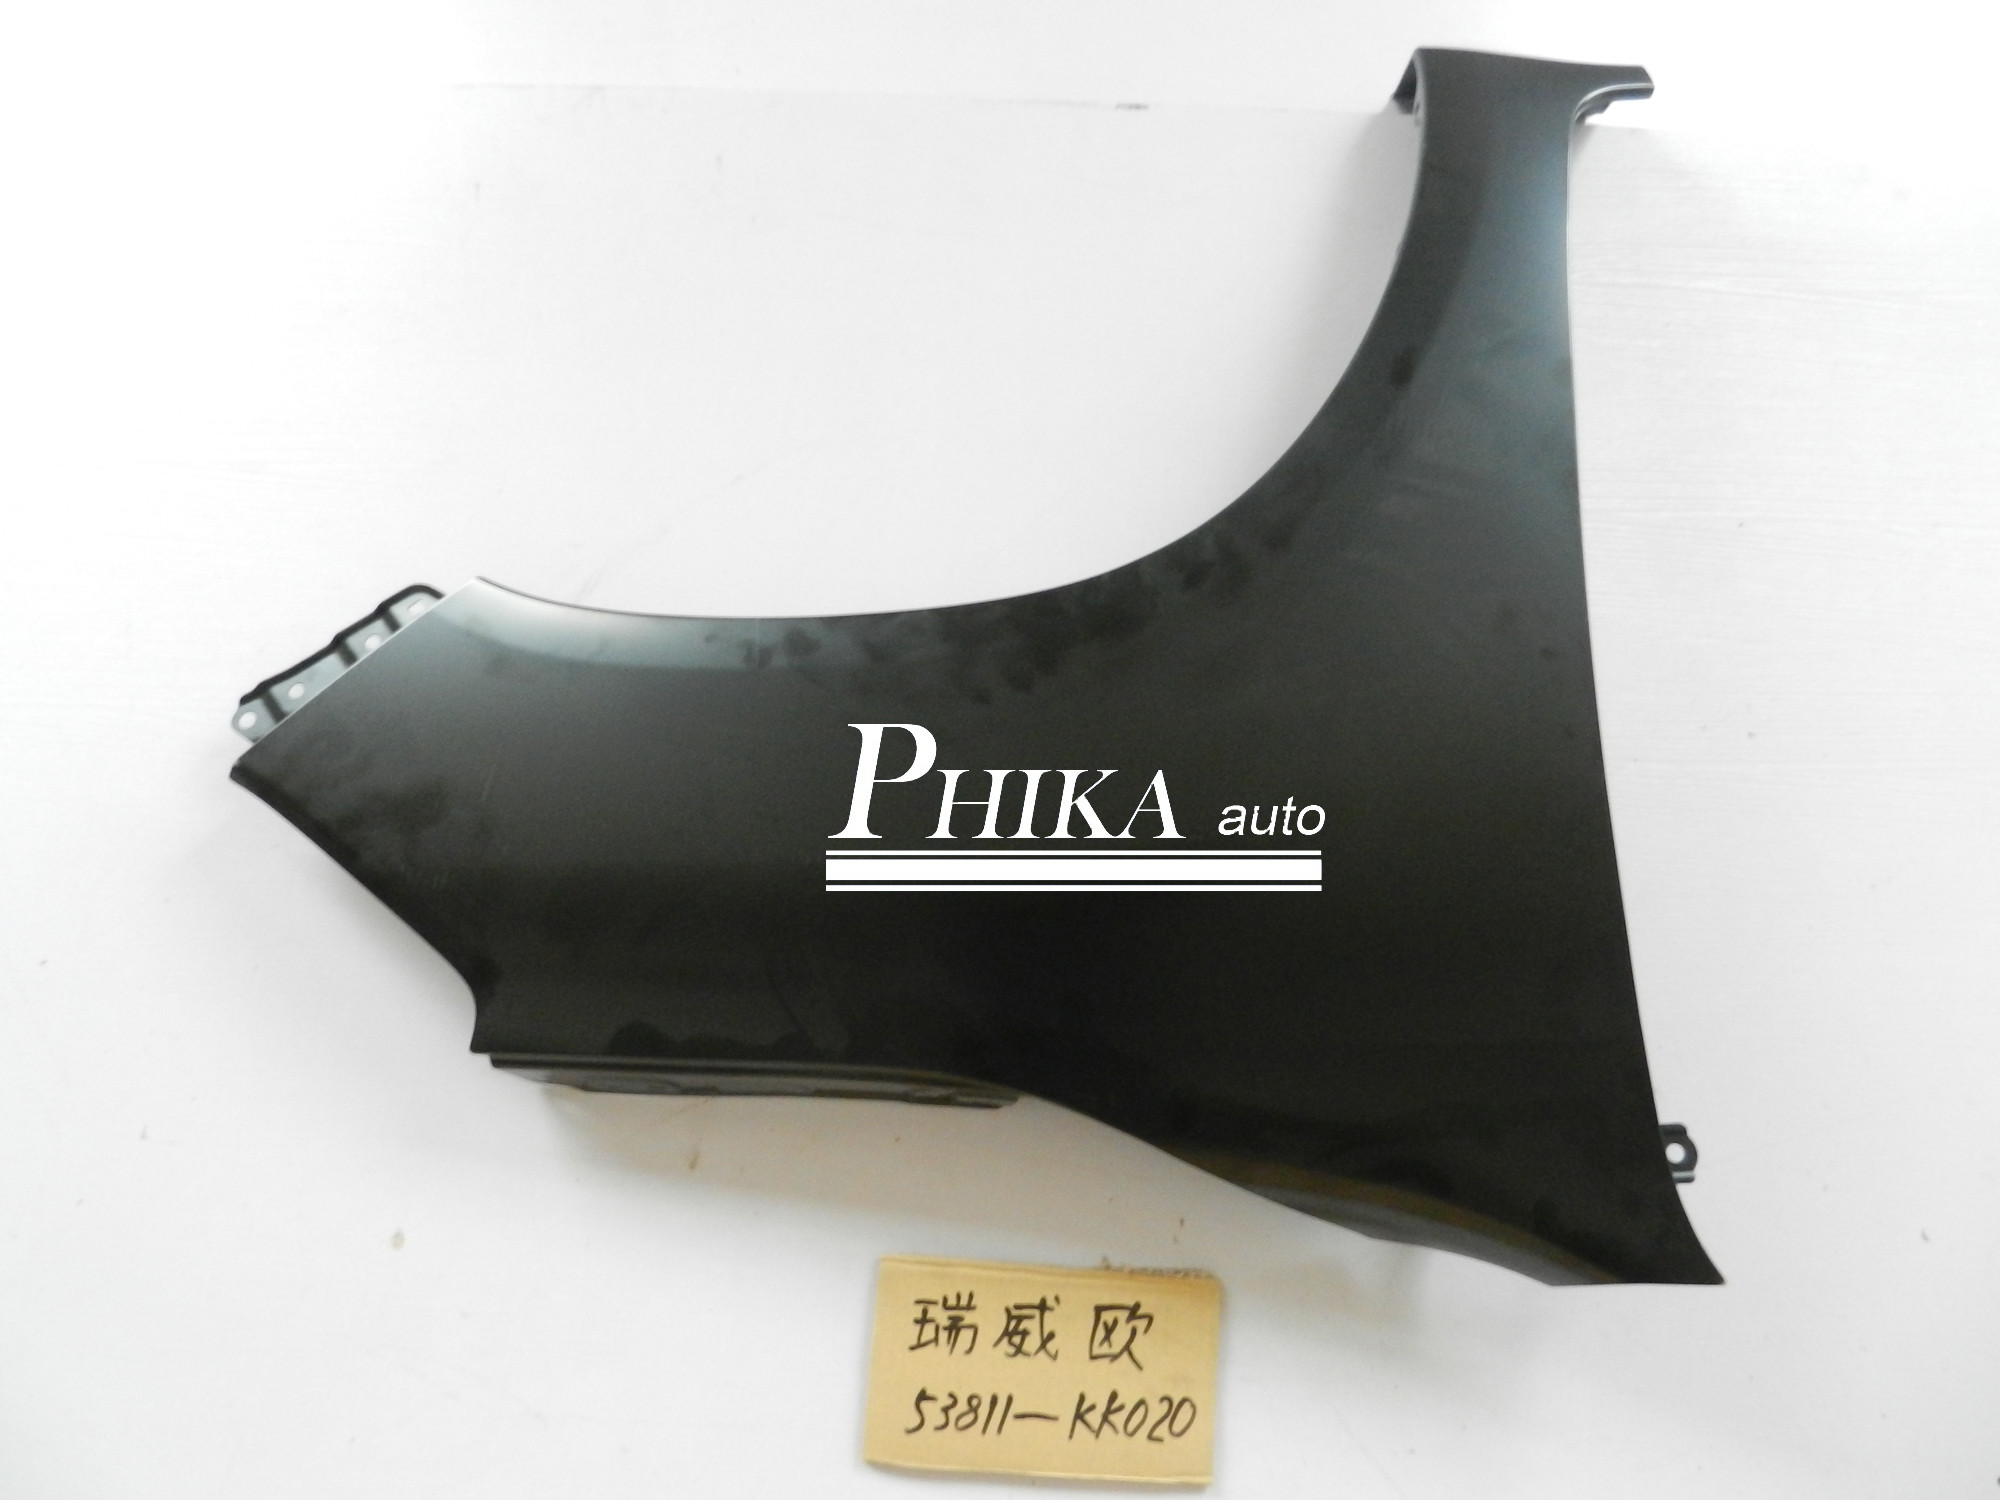 Japanese Toyota Hilux Revo Car Front Fender 0.8 mm Thick Steel Material